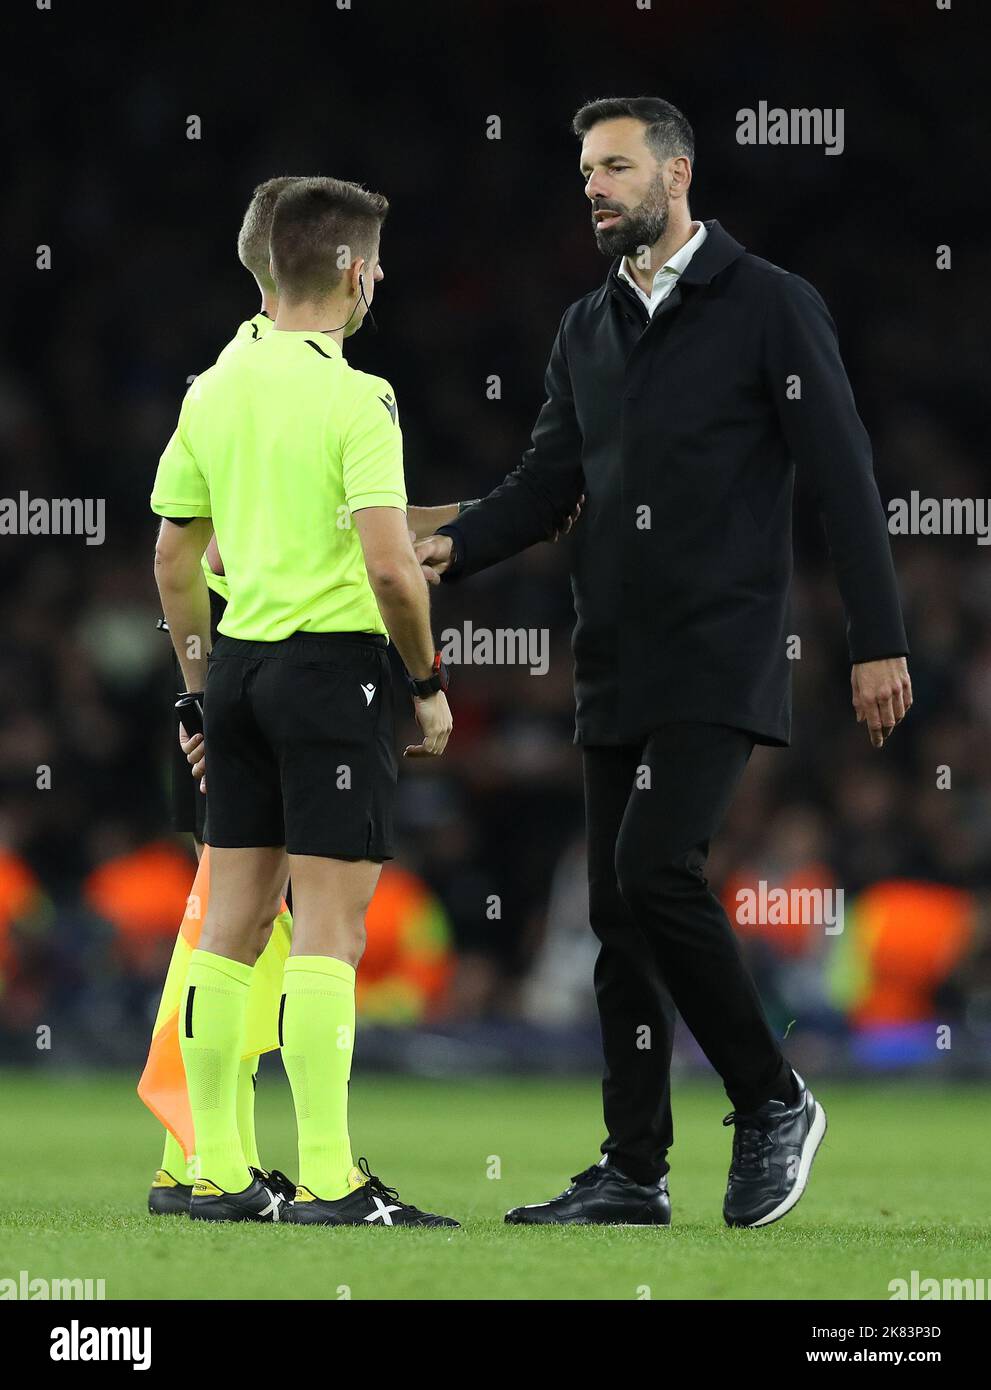 London, UK. 20th October 2022. Ruud van Nistelrooy, manager of PSV Eindhoven shakes hands with the officials after the UEFA Europa League match at the Emirates Stadium, London. Picture credit should read: Paul Terry / Sportimage Credit: Sportimage/Alamy Live News Stock Photo